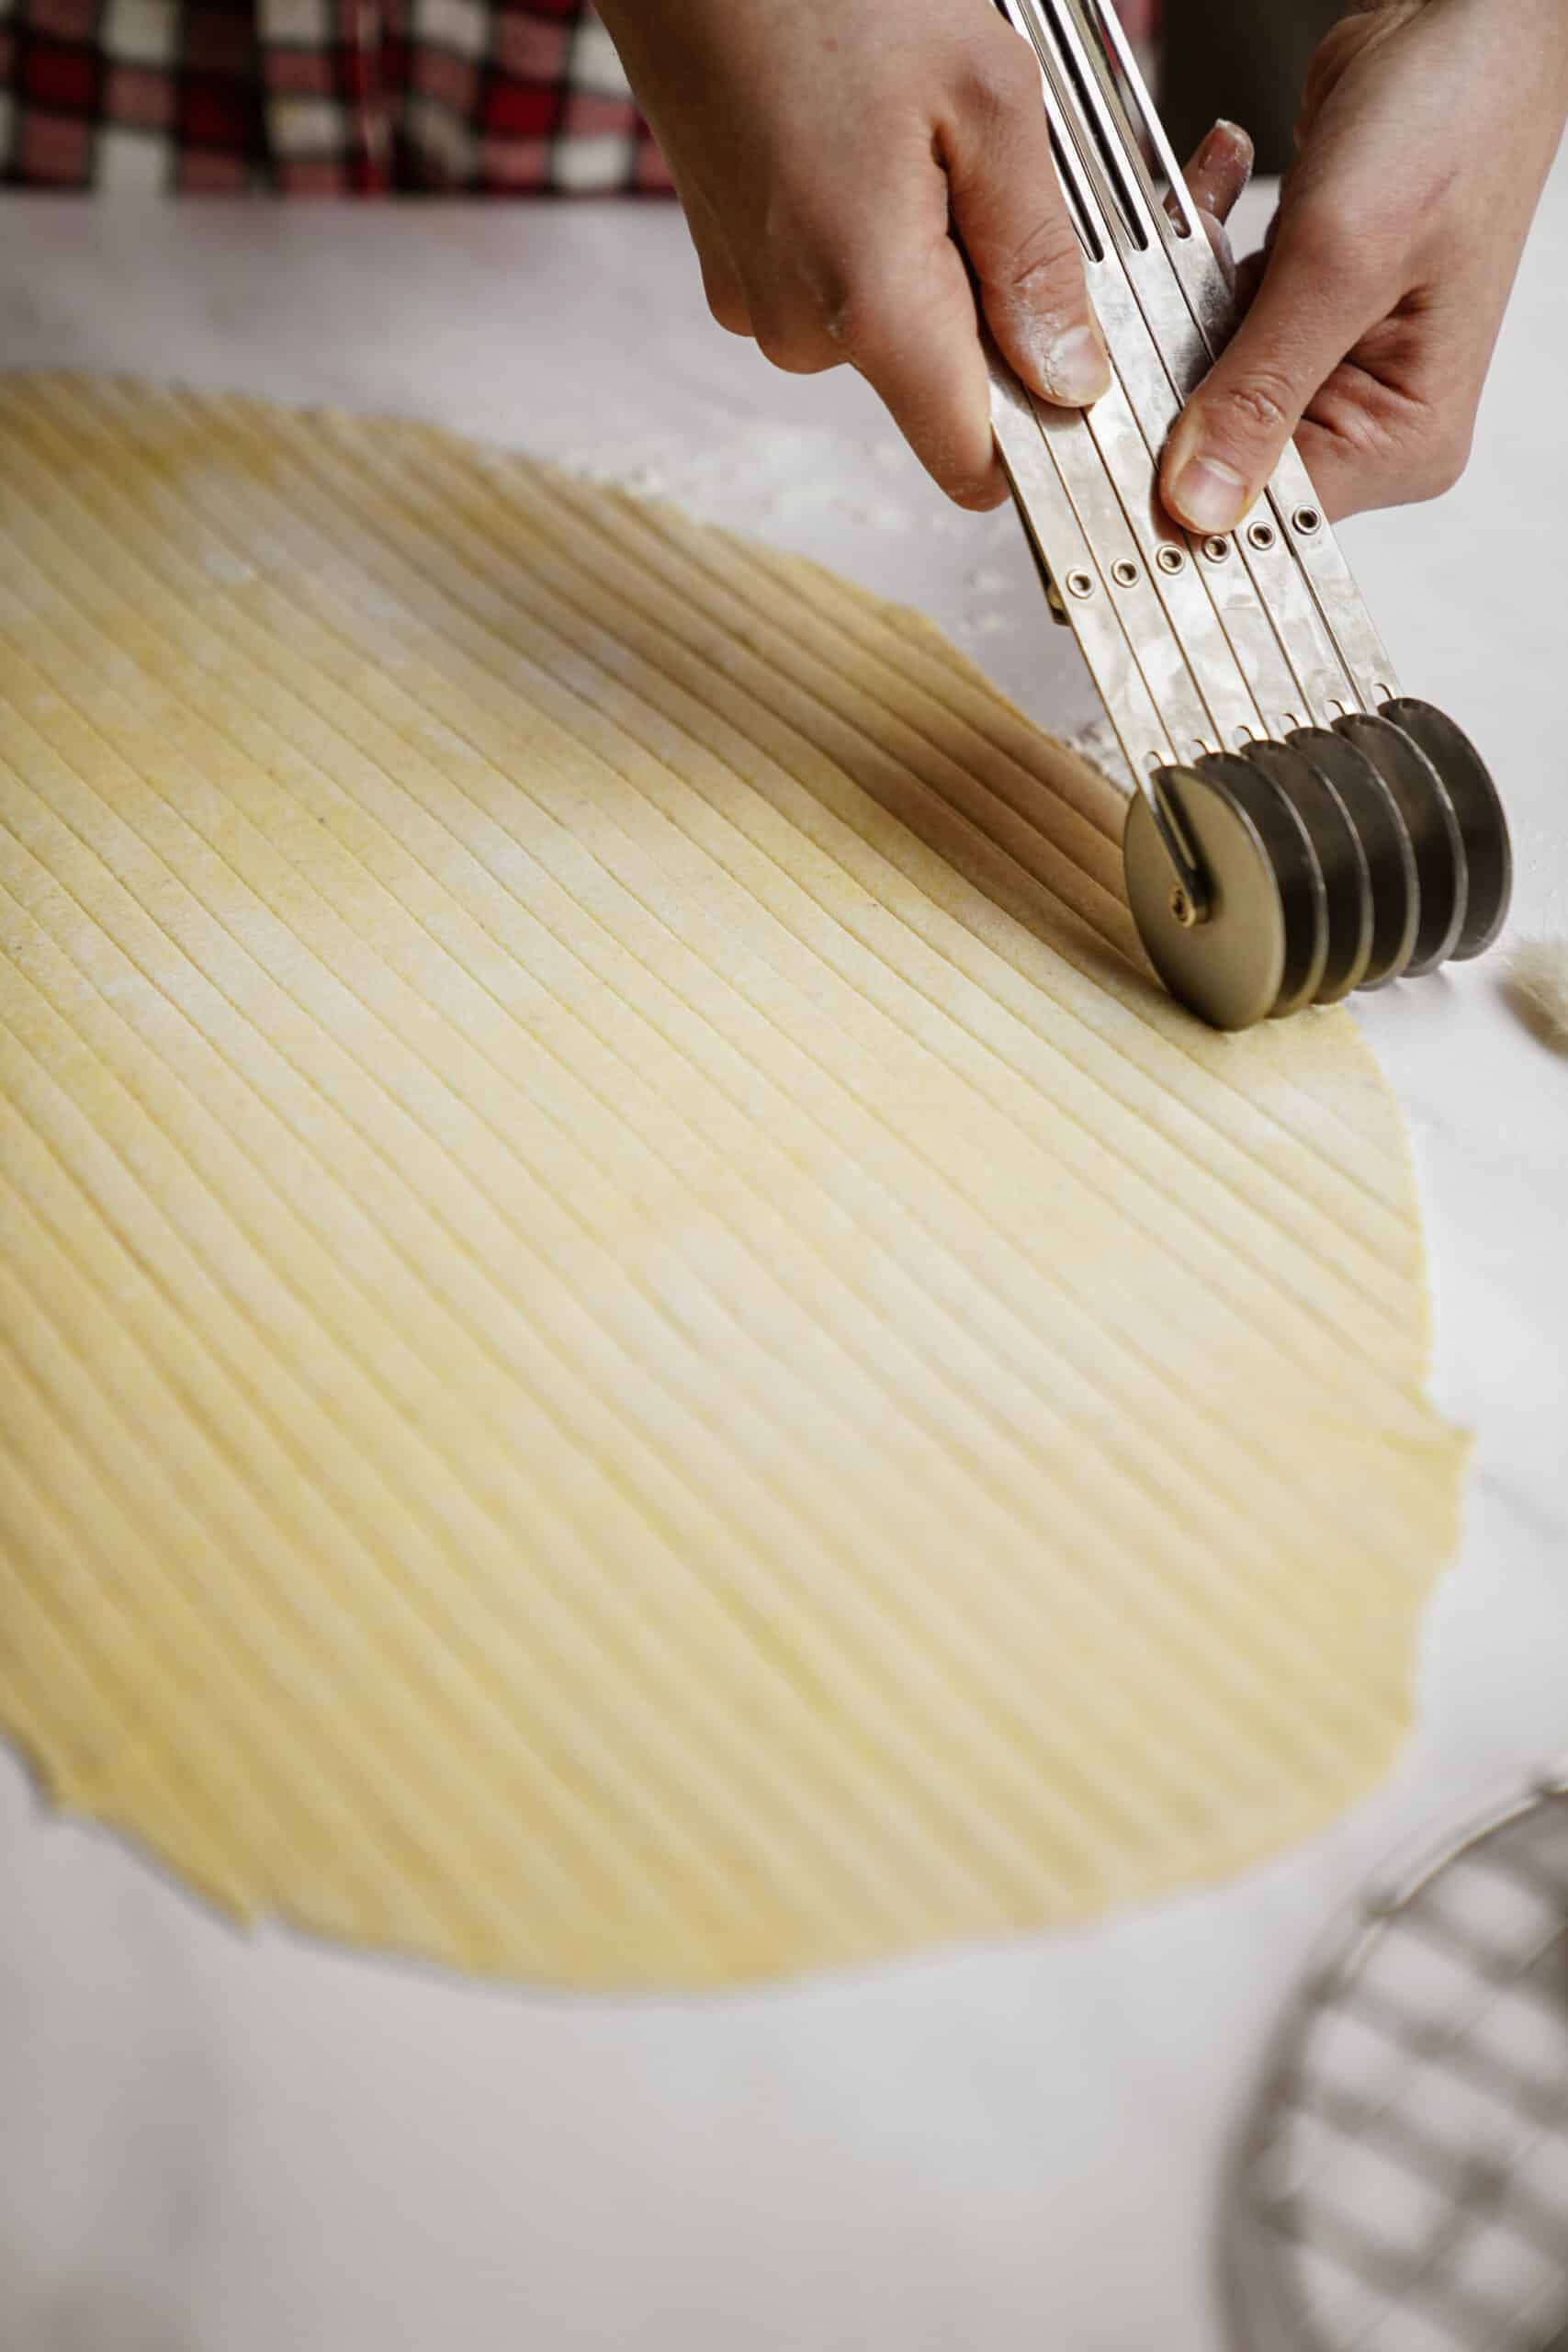 Pasta noodles being cut out of dough